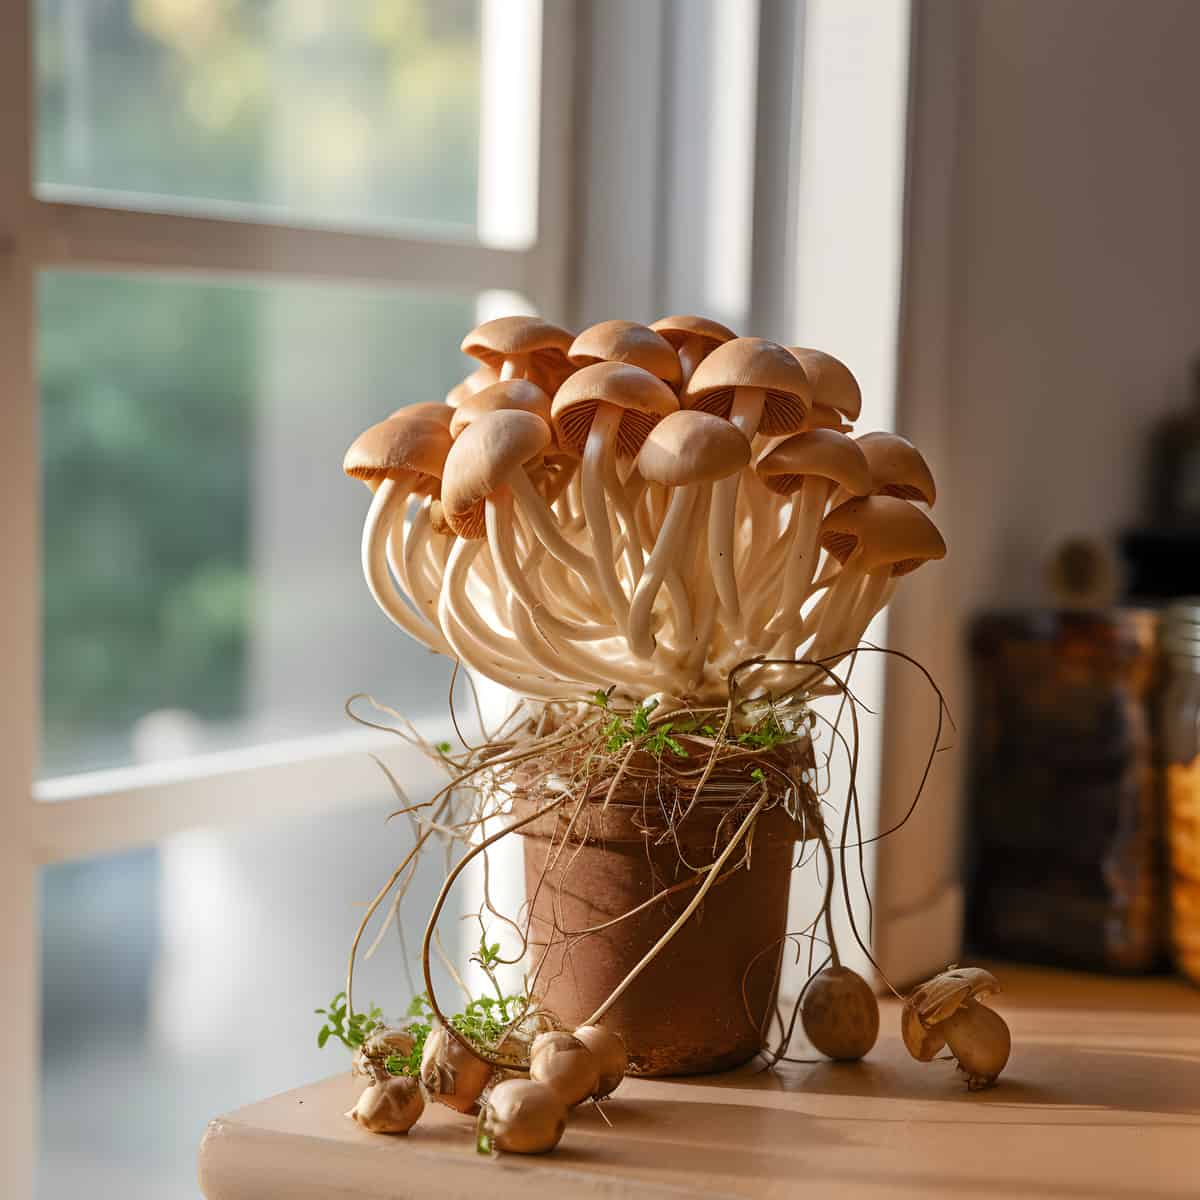 Straw Mushrooms on a kitchen counter